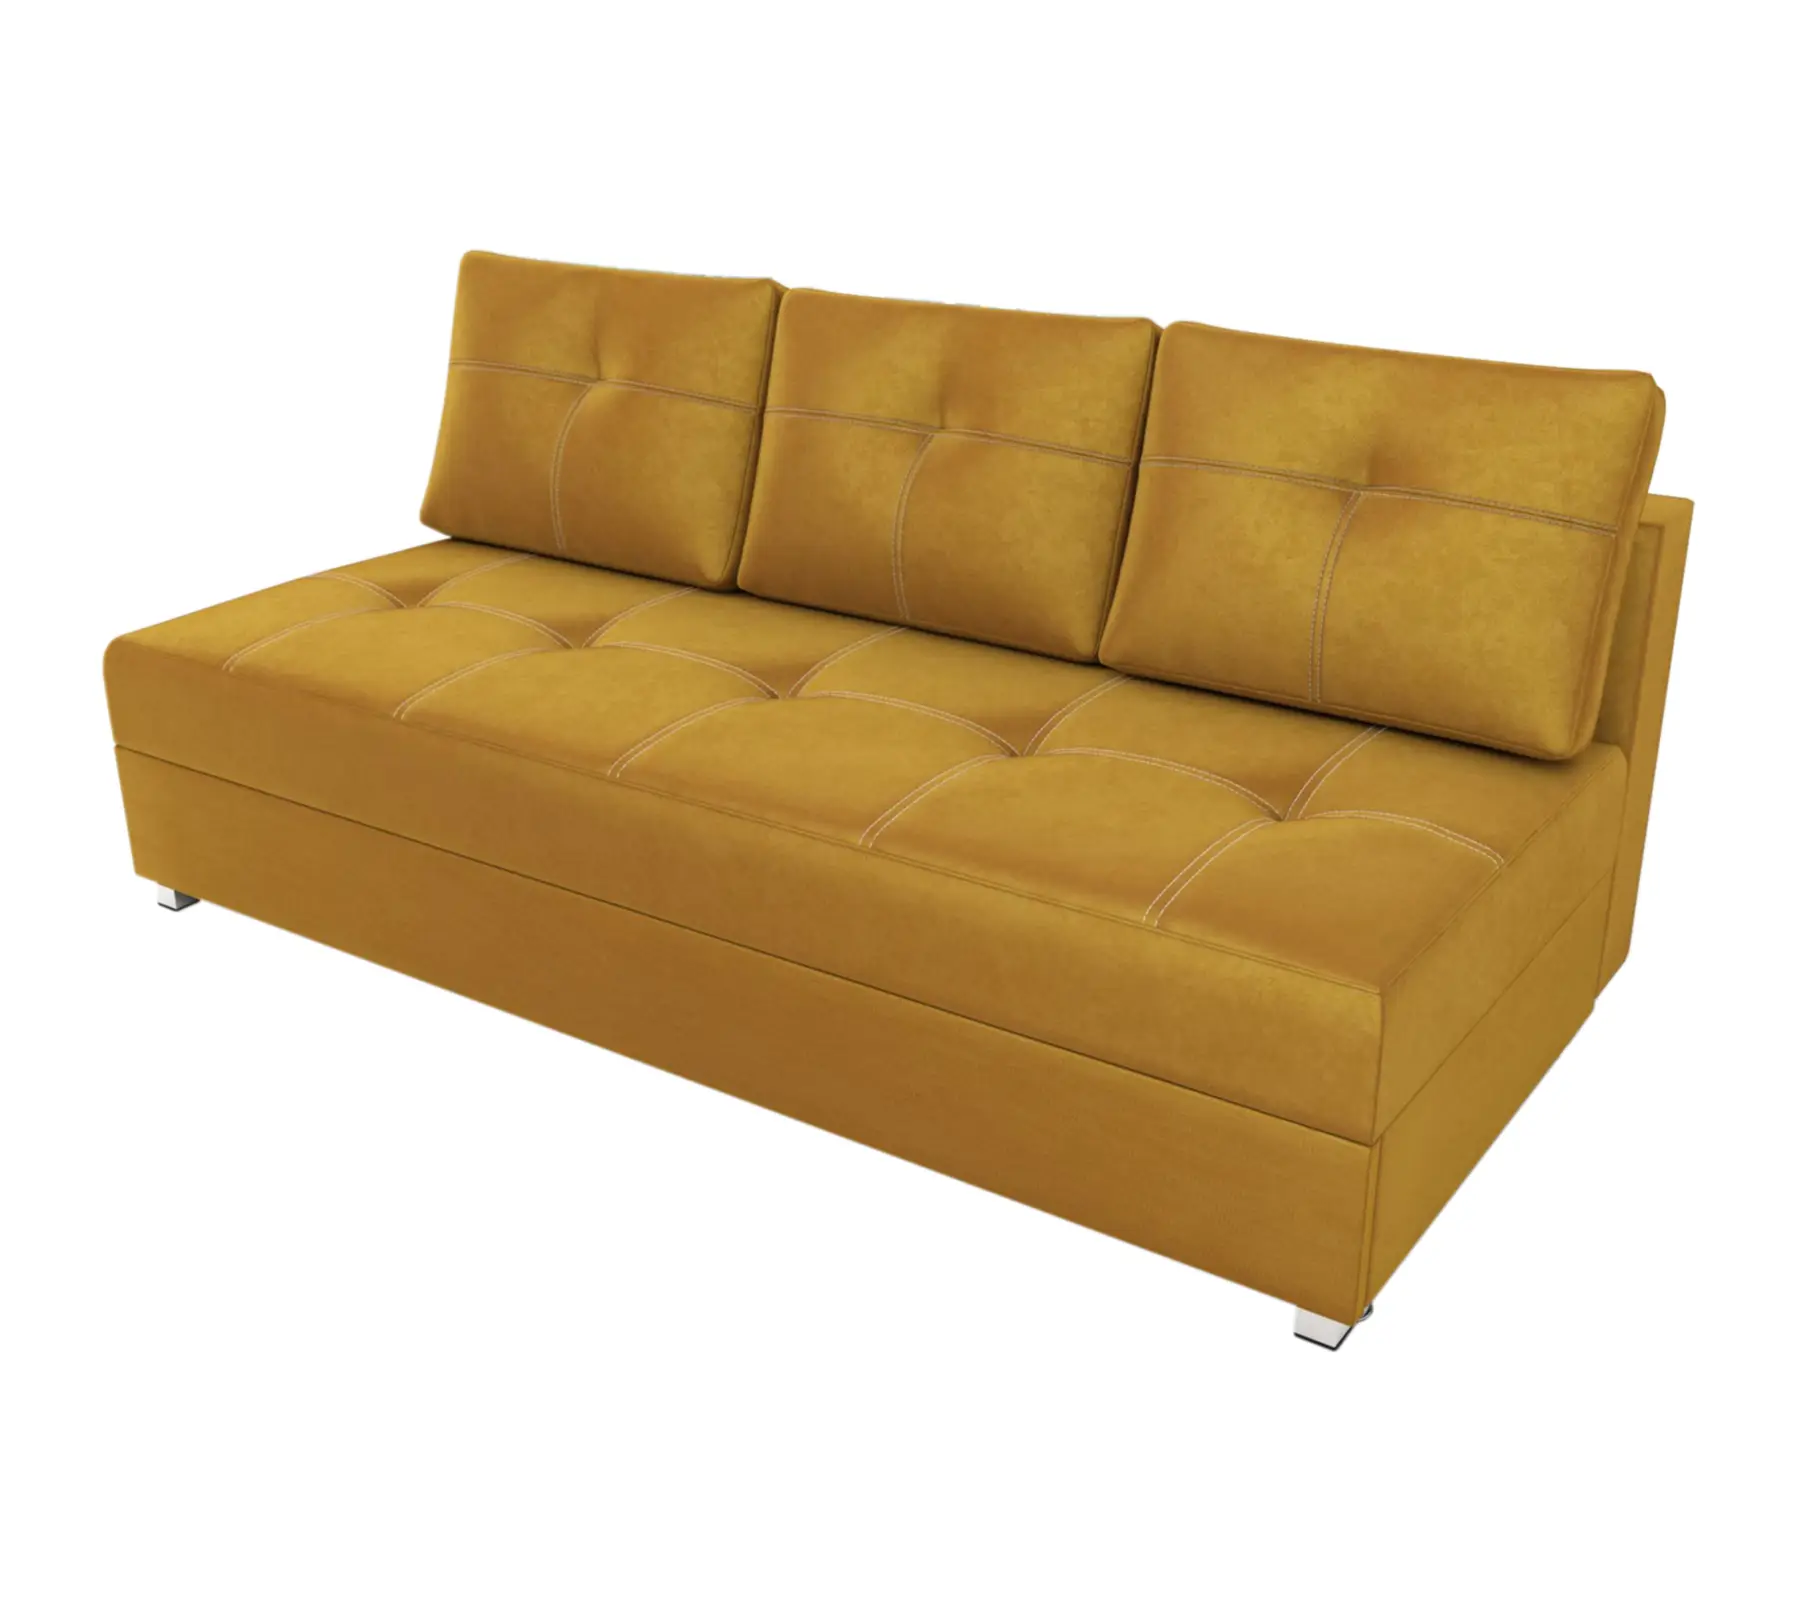 Sofa CANALE Schlafunktion mit